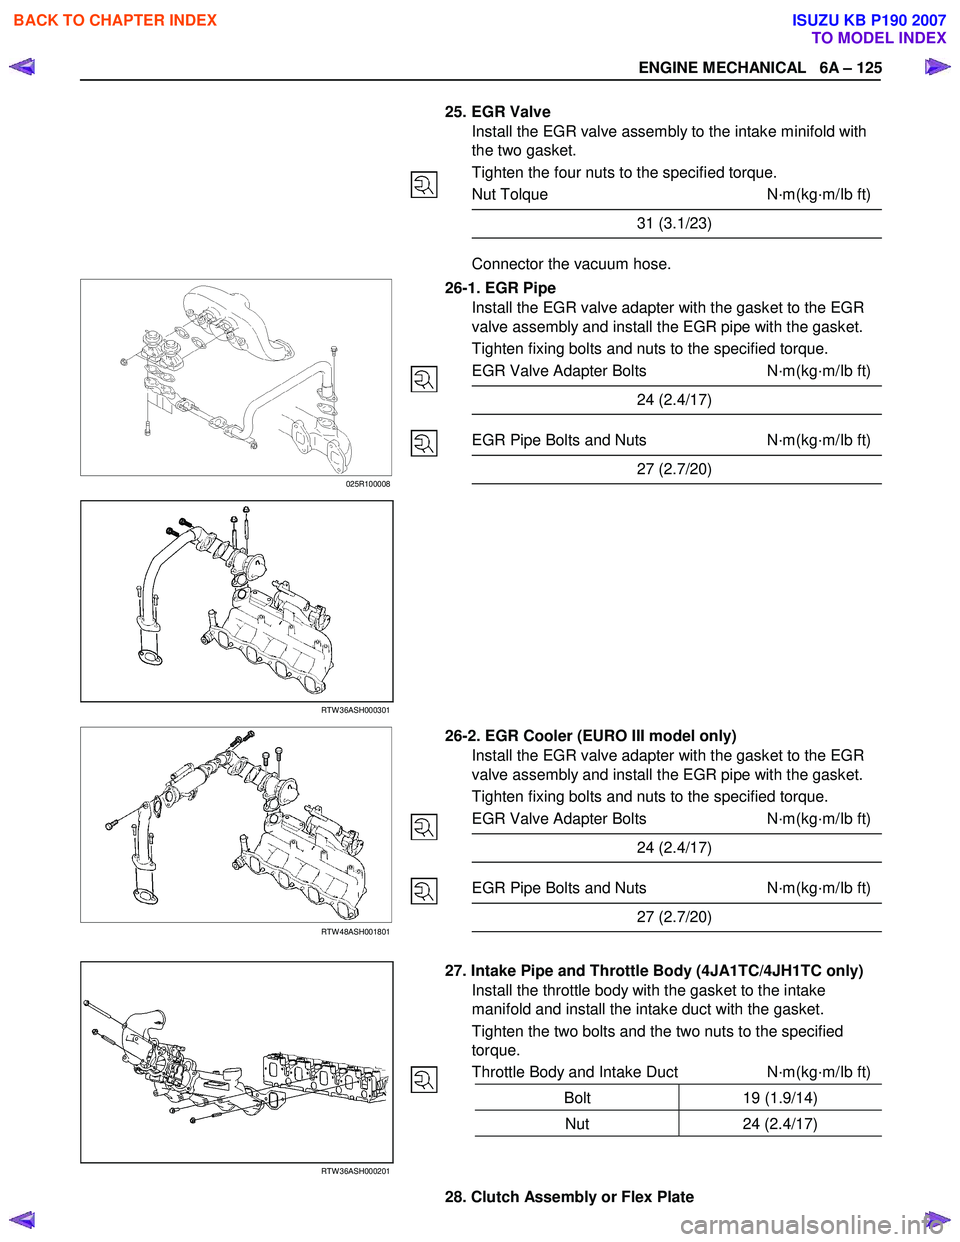 ISUZU KB P190 2007  Workshop Owners Manual ENGINE MECHANICAL   6A – 125 
   
 
 
 
 
 
 
 25.  EGR Valve 
Install the EGR valve assembly to the intake minifold with  
the two gasket.  
Tighten the four nuts to the specified torque. 
Nut Tolq